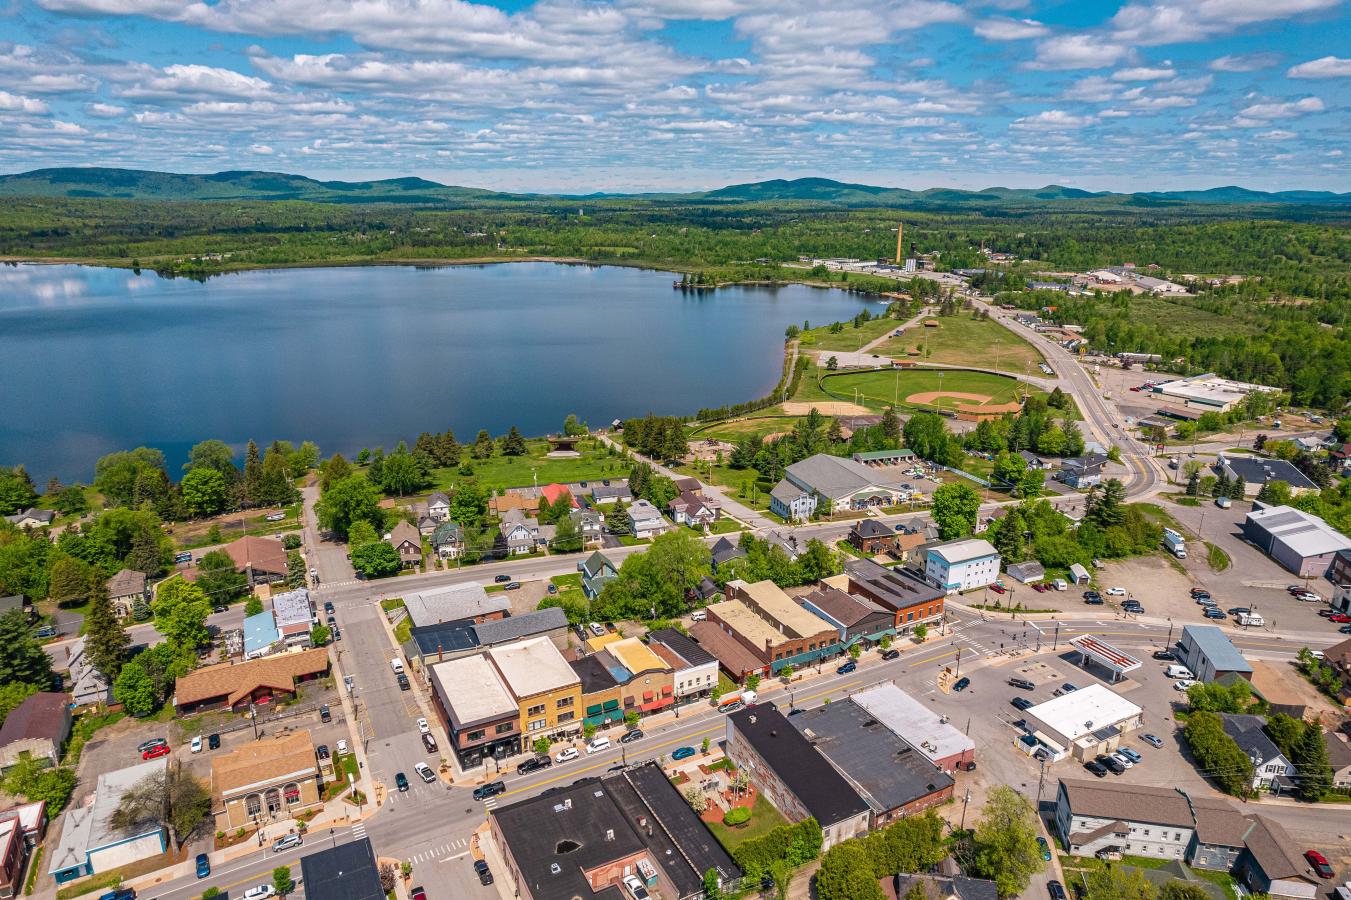 A stunning view of downtown Tupper Lake, NY featuring Main Street and beautiful Raquette Pond.